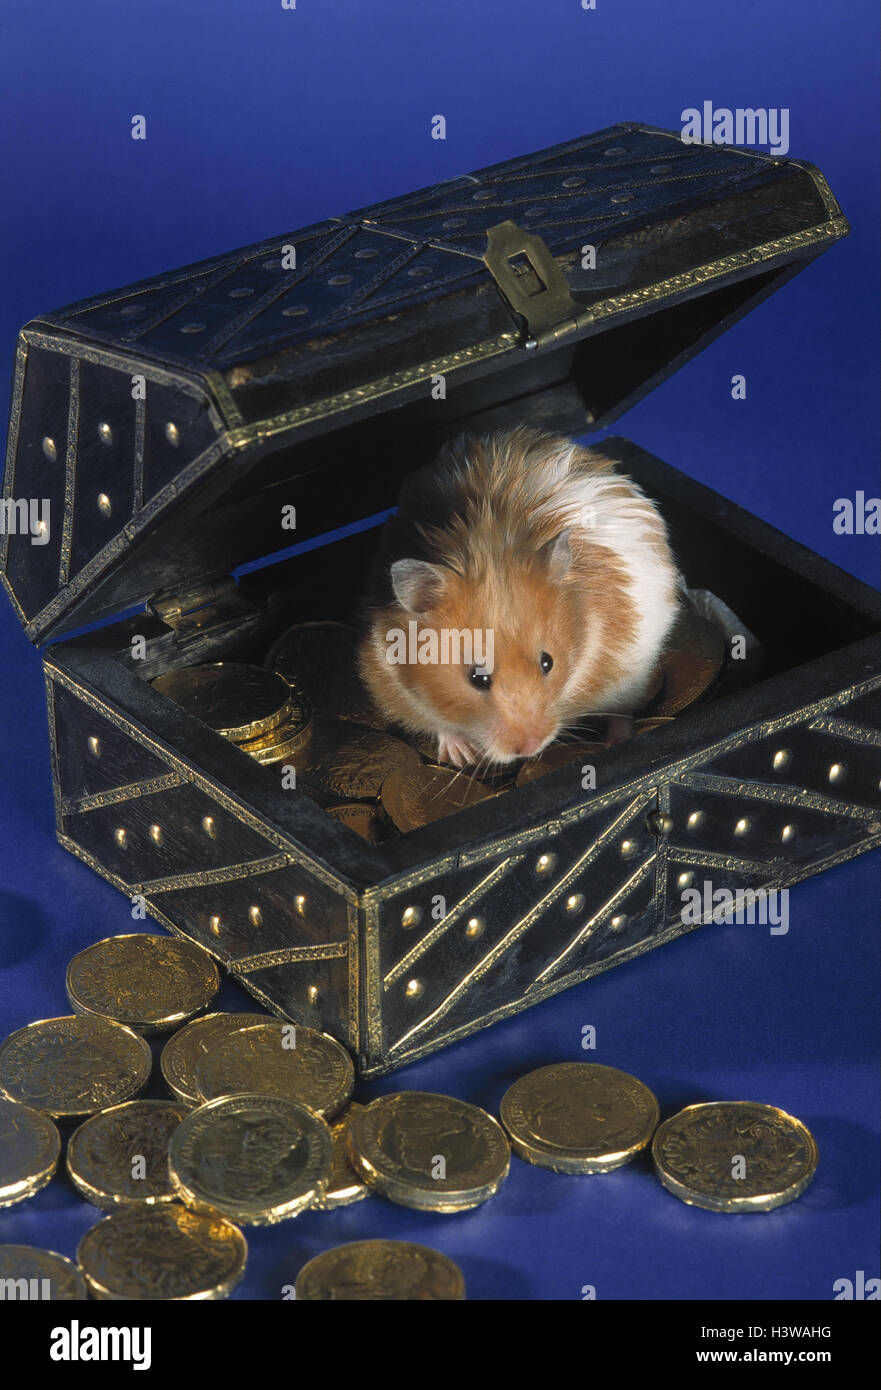 Treasure box, golden coins, golden hamsters Scahtztruhe, gold, coins, valuably, richly, wealth, icon, hoard, save, stingy, hamsters, hide, play, box, golden ducats Stock Photo